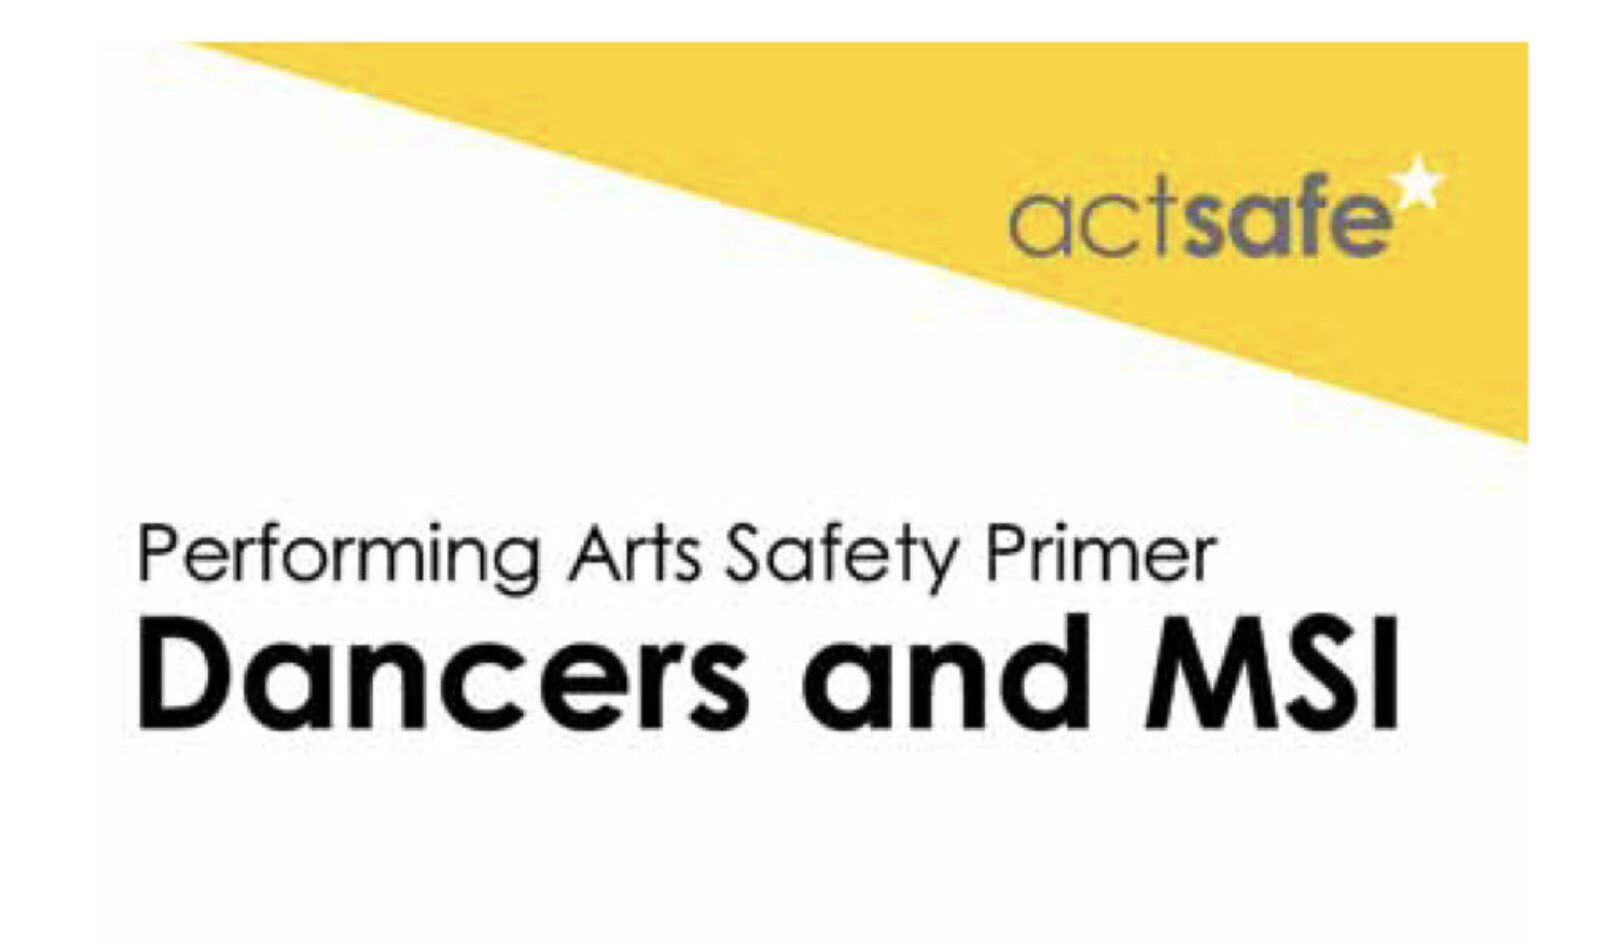 Dancers and MSI Performing Arts Safety Primer